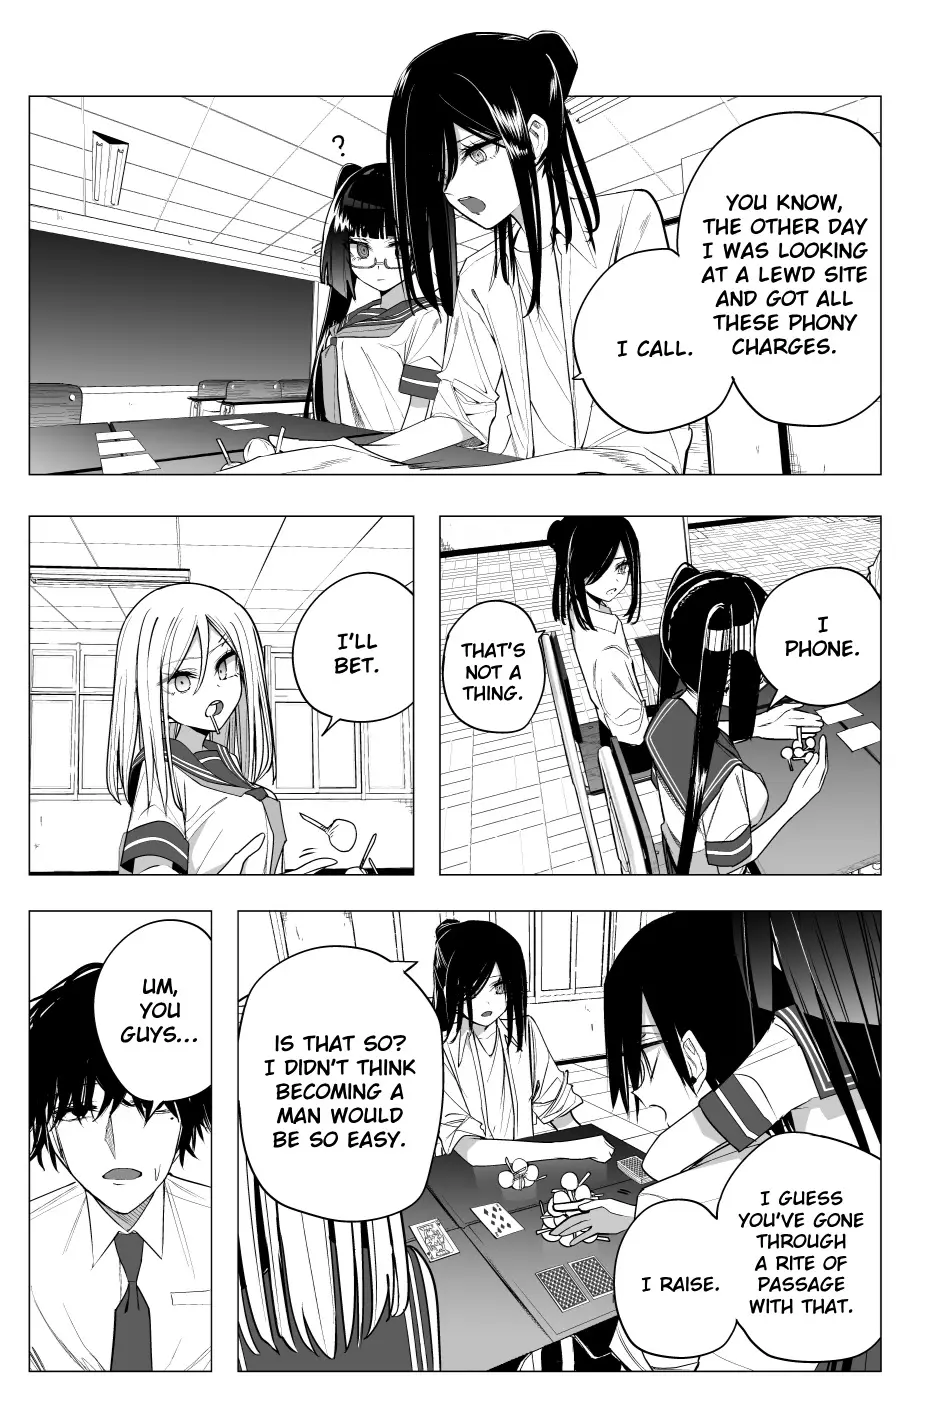 Mitsuishi-San Is Being Weird This Year - 33 page 2-6ae64645